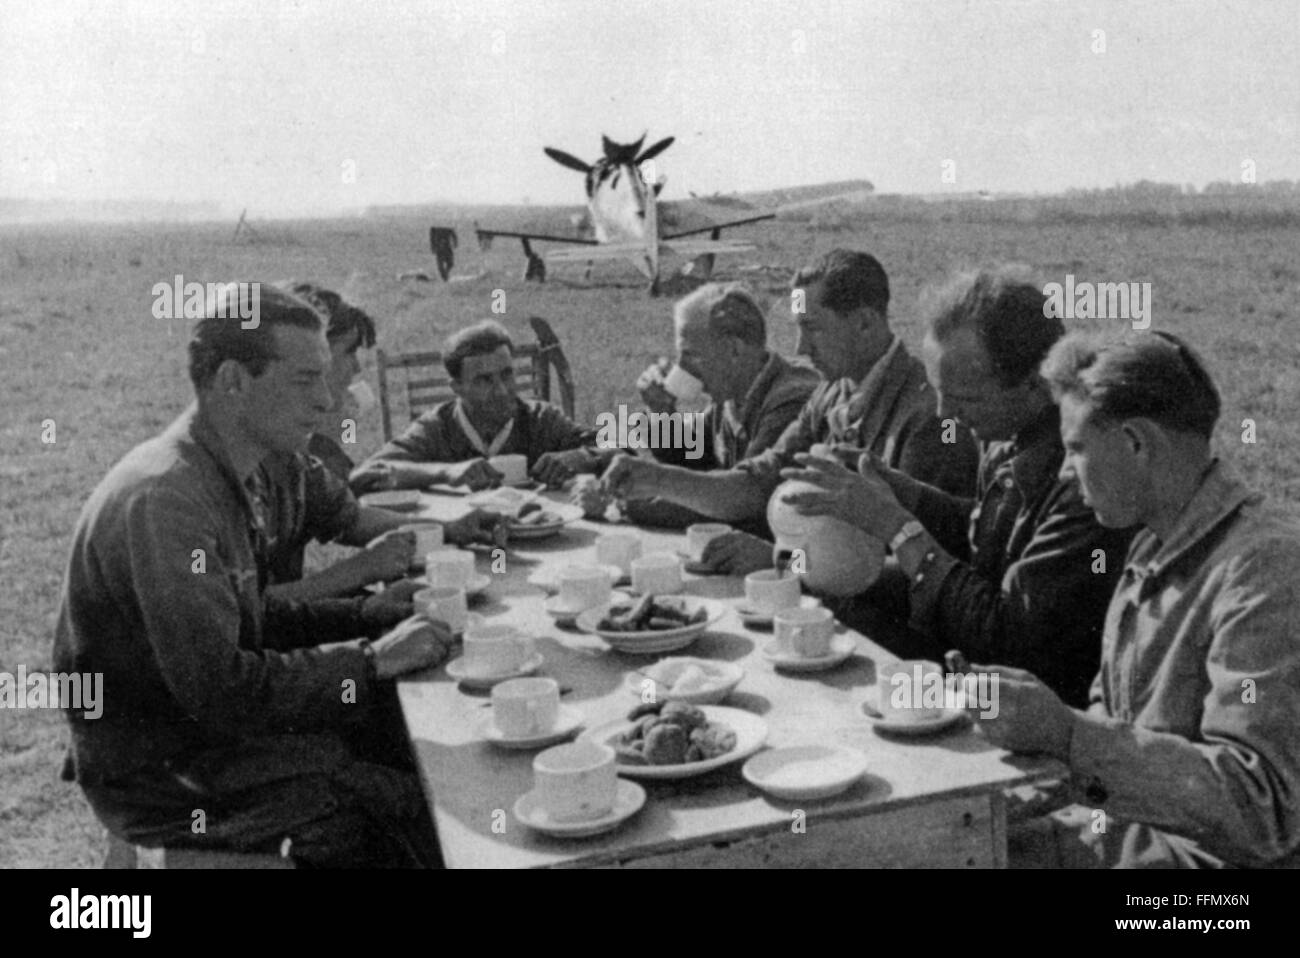 Kittel, Otto 'Bruno', 21.2.1917 - 16.2.1945, German fighter pilot, half length, at the front of the table, as staff sergeant in the Fighter Wing 54, celebration of the bestowal of the Knight's Cross, air base Vitebsk, Belarus, 29.10.1943, Stock Photo